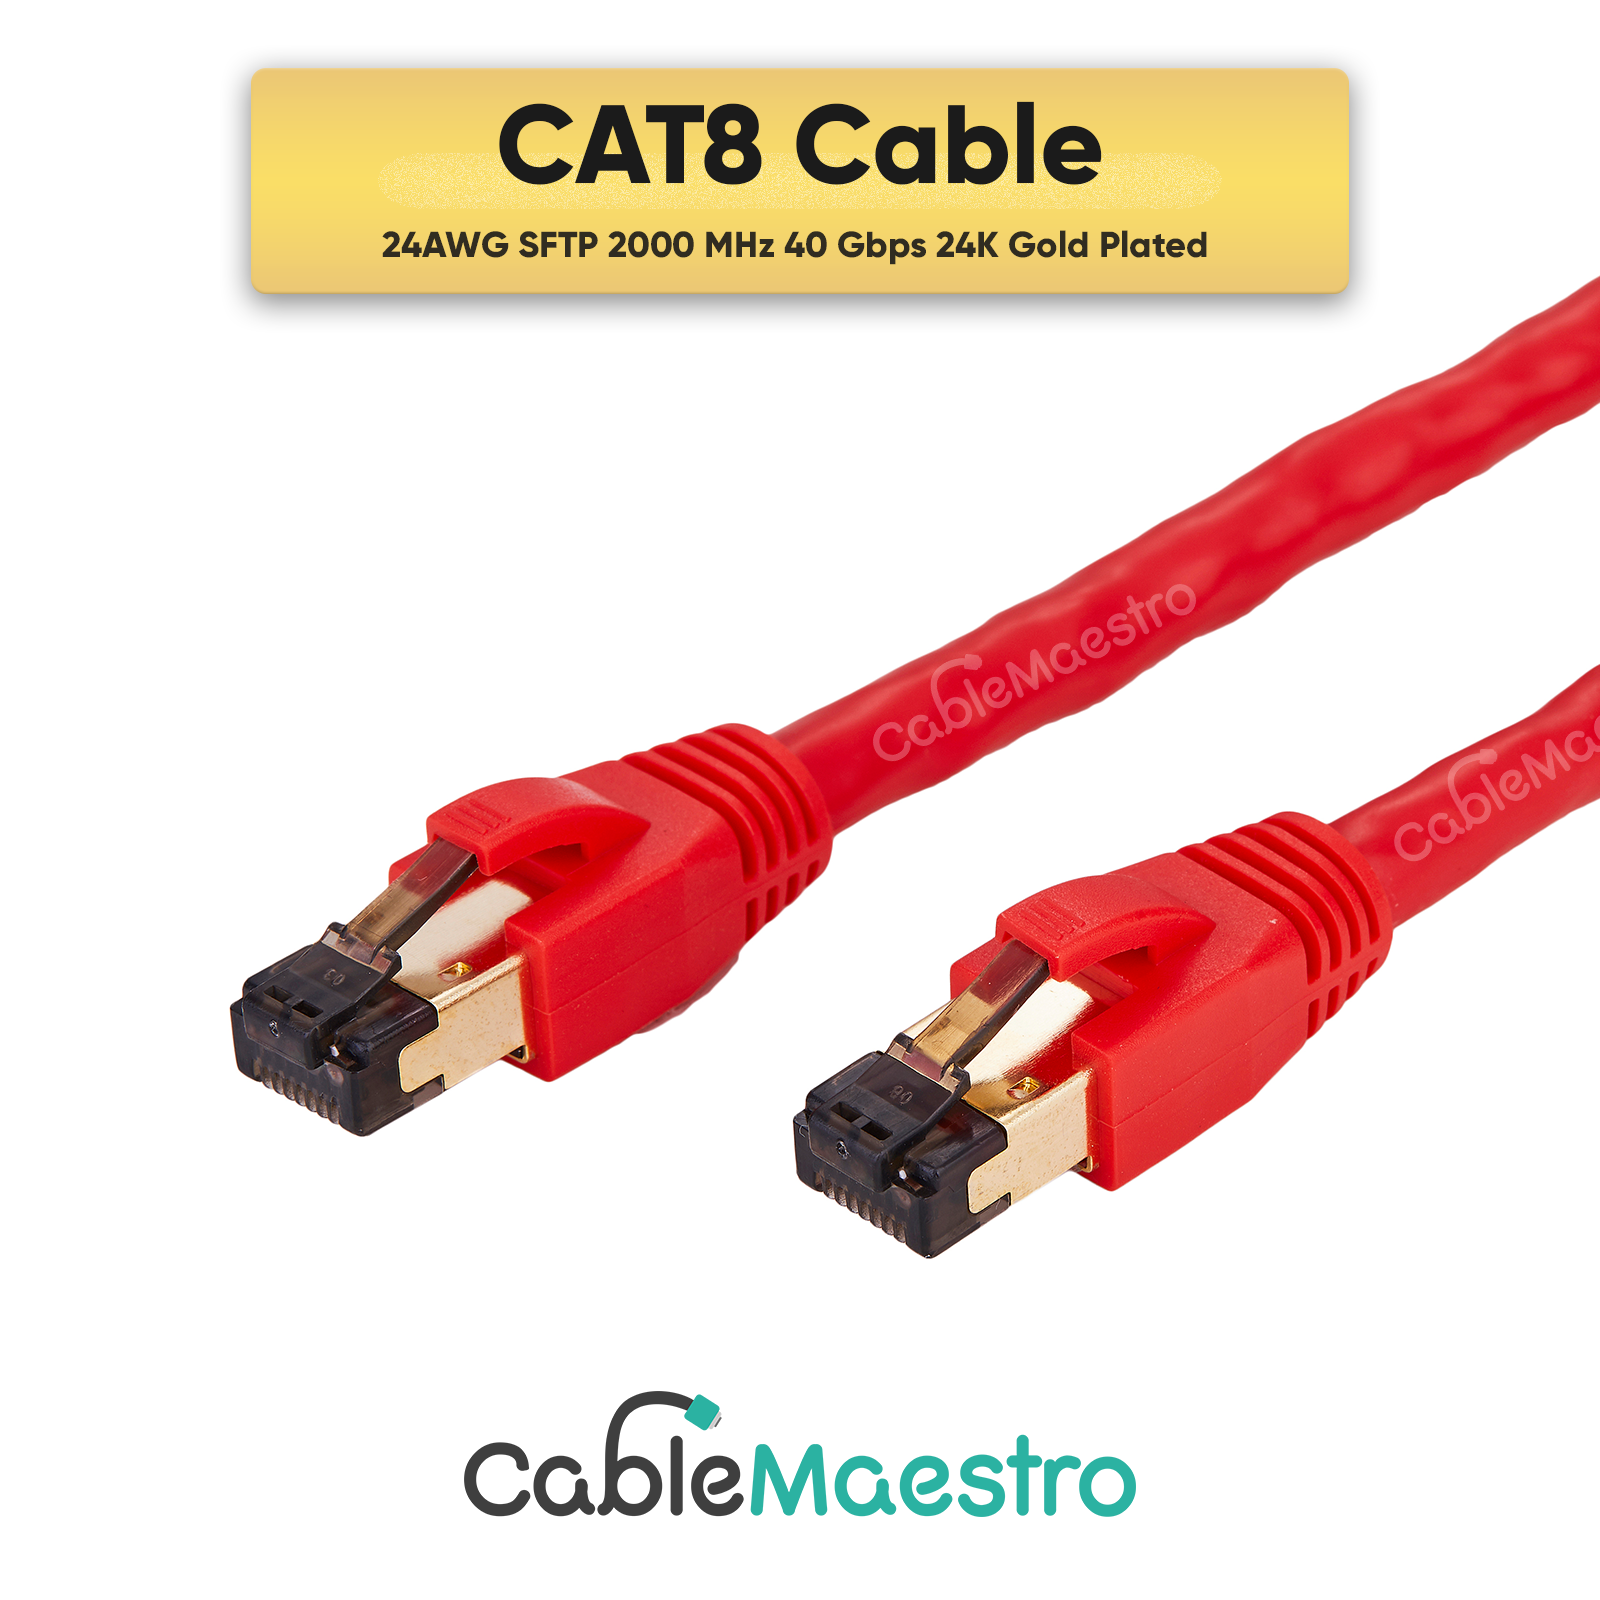 CAT8 Ethernet Cable Cord Patch Copper 26AWG SFTP Shielded RJ-45